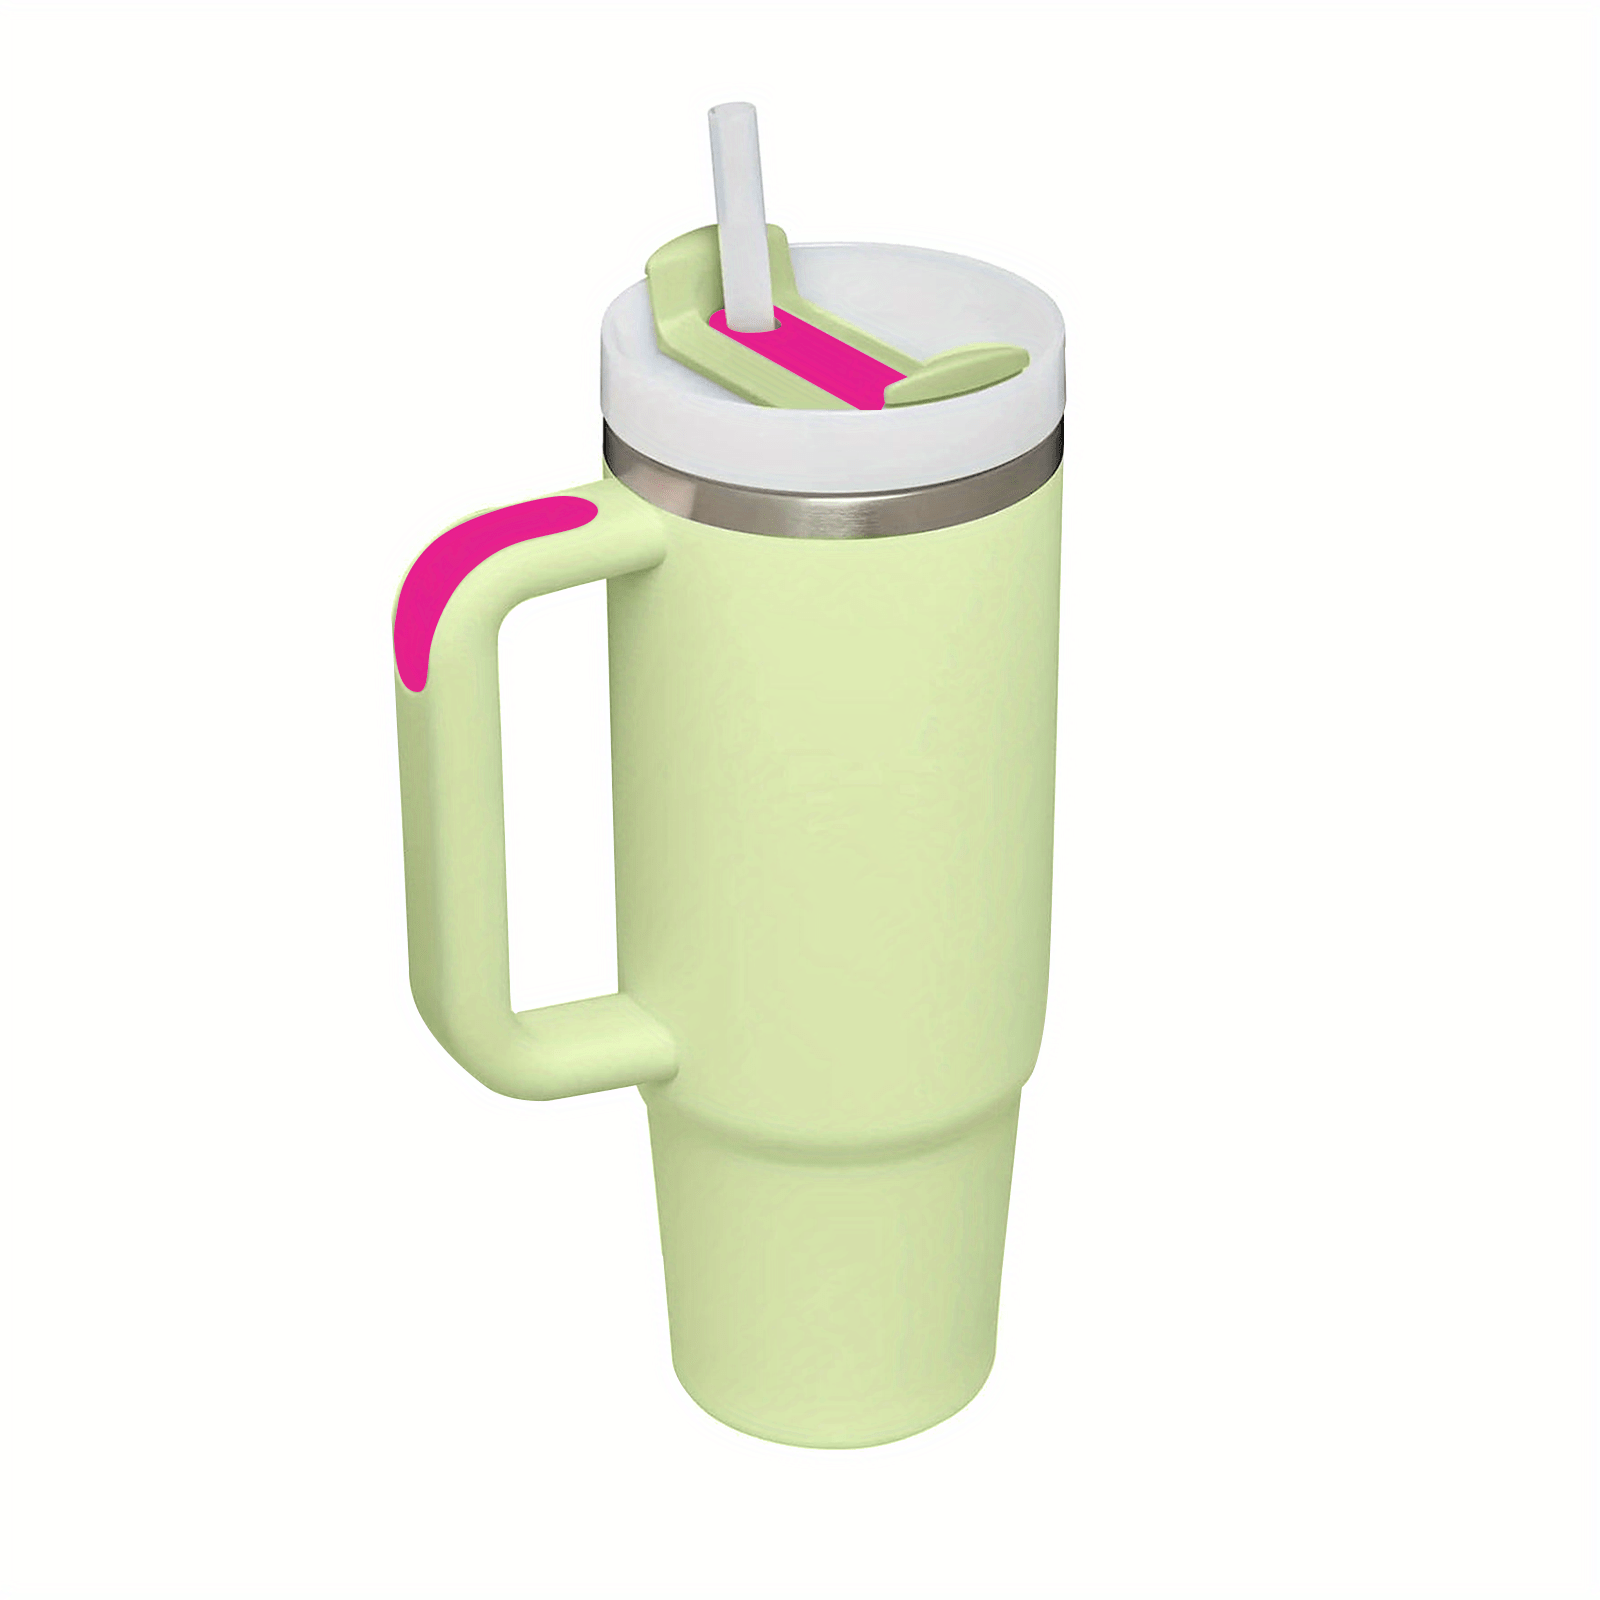 40 oz Insulated Water Bottle with Straw, Dishwasher Safe BPA-Free